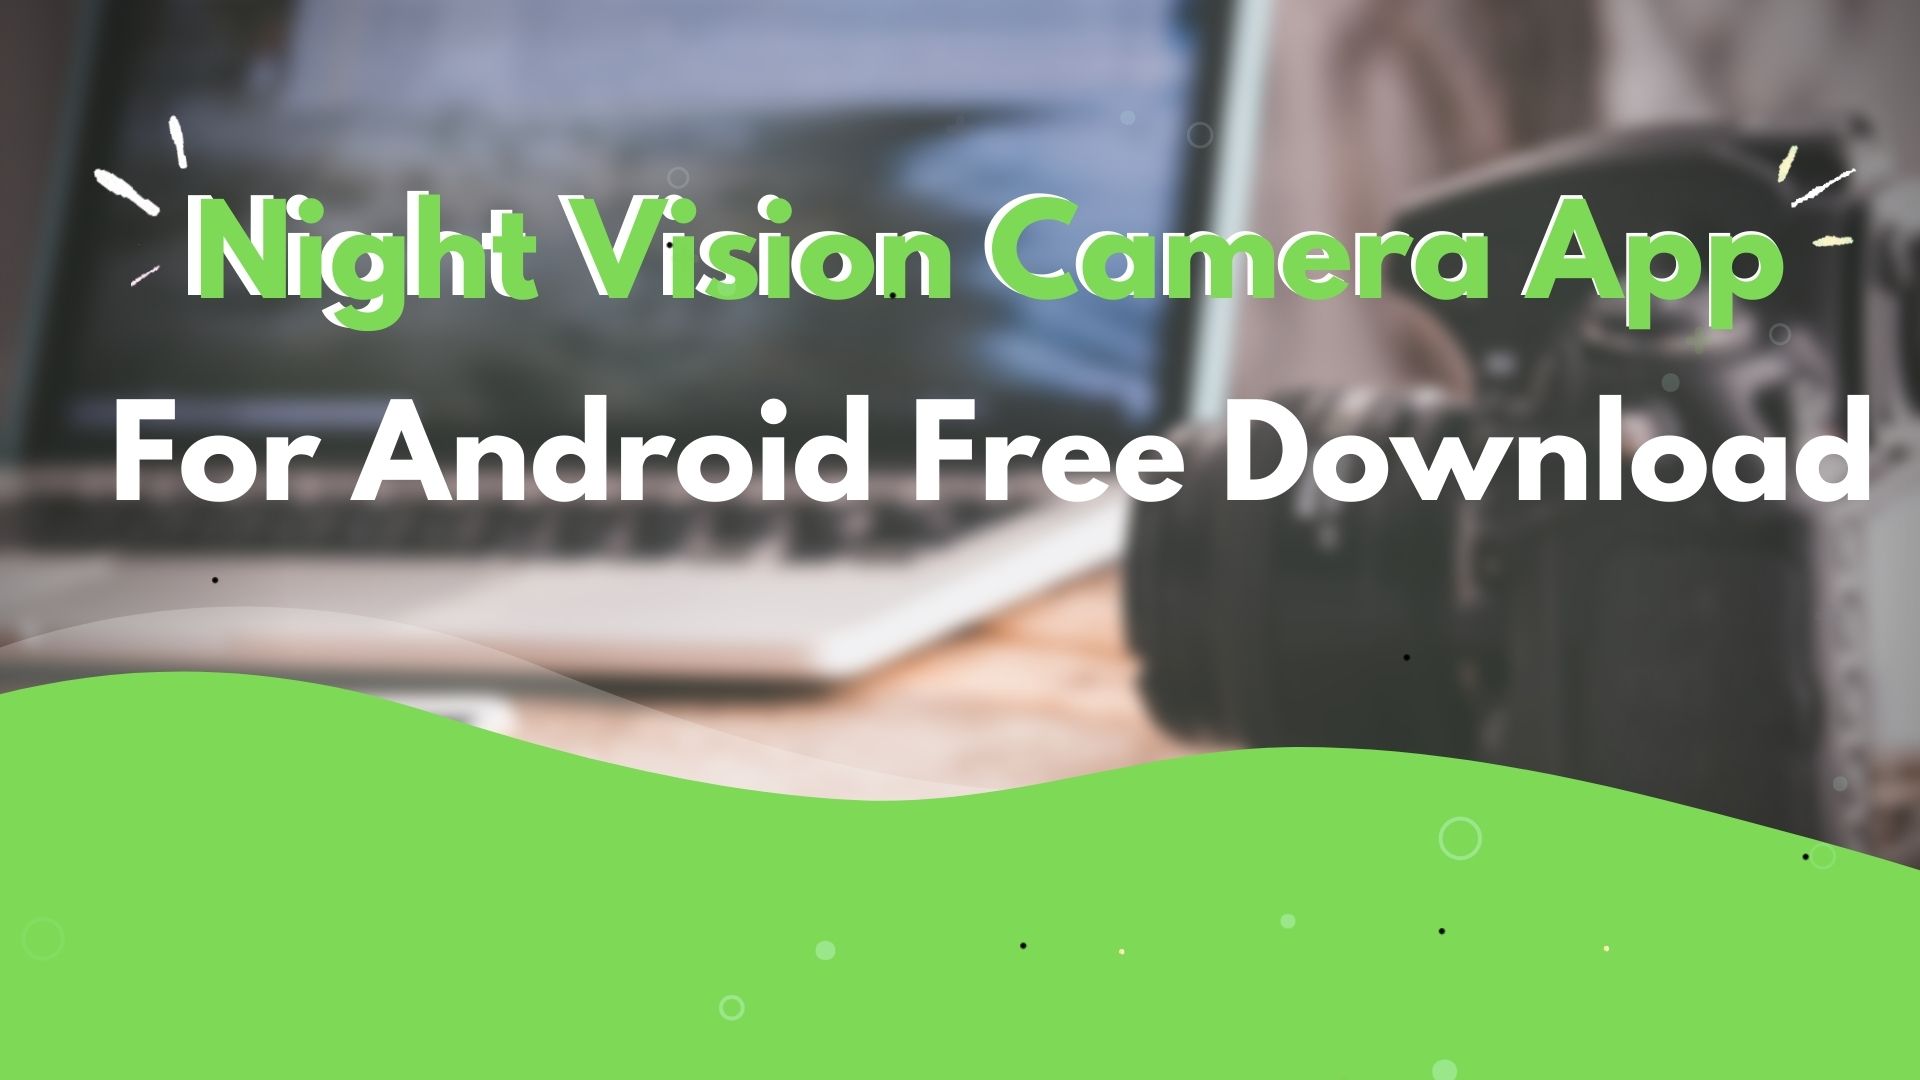 Night Vision Camera App For Android Free Download